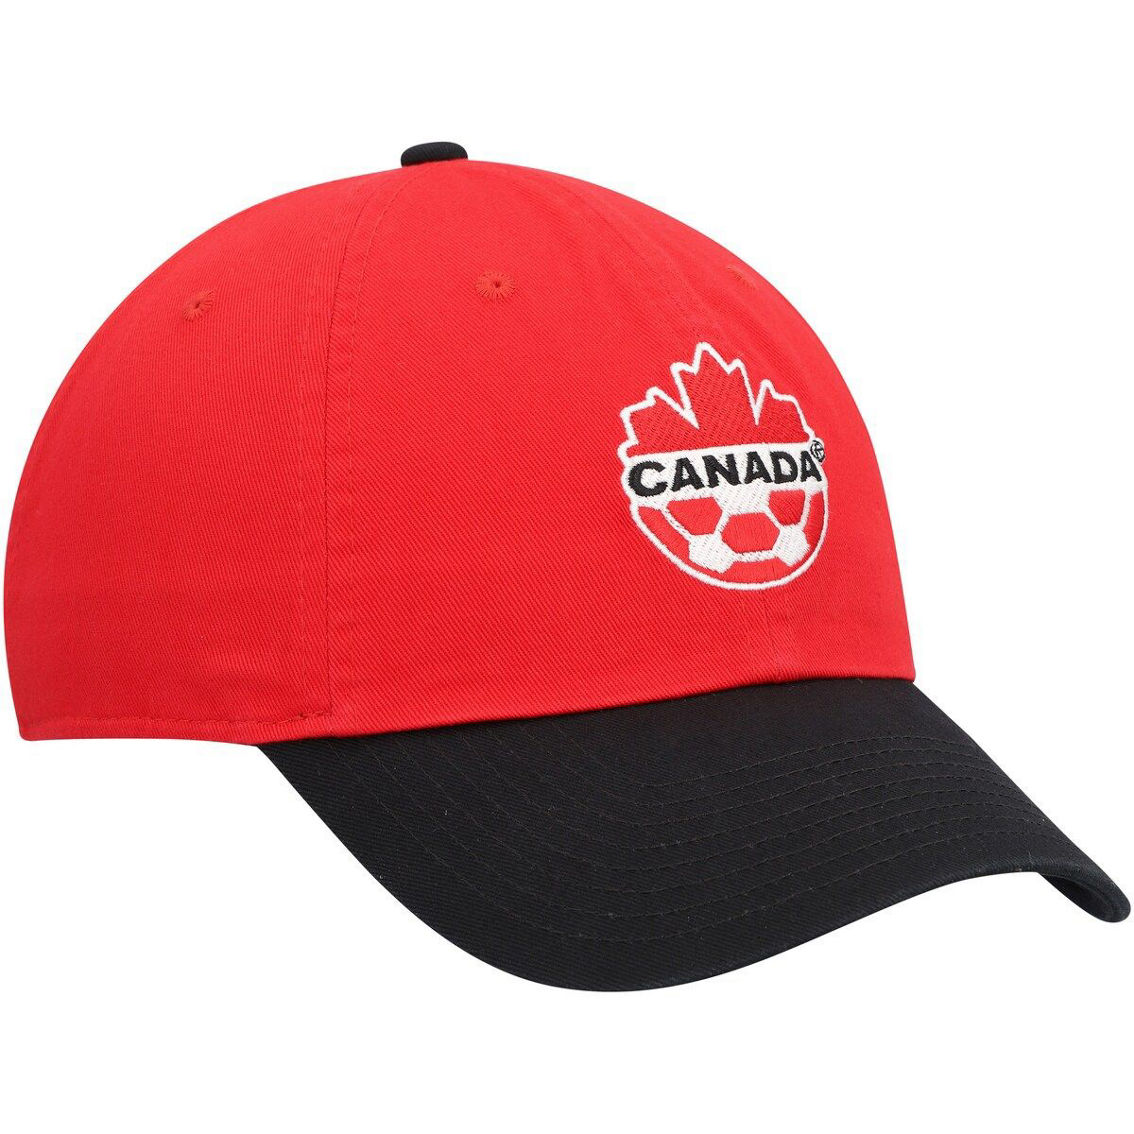 Nike Men's Red/Charcoal Canada Soccer Campus Adjustable Hat - Image 4 of 4